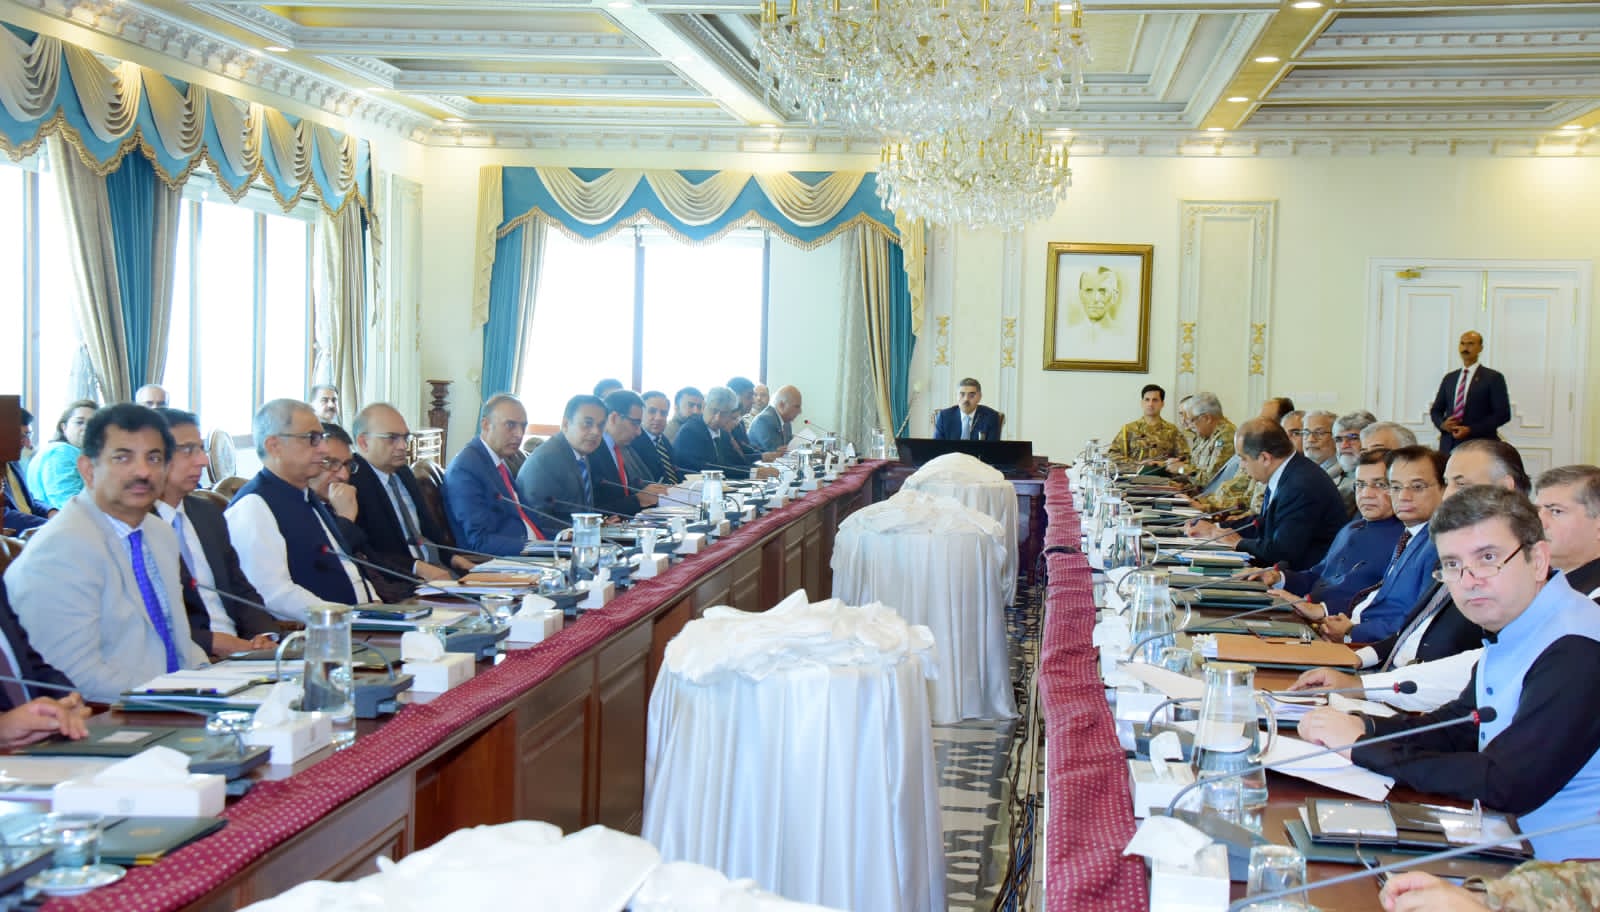 Prime Minister chairs the 5th Apex Committee Meeting of Special Investment Facilitation Council